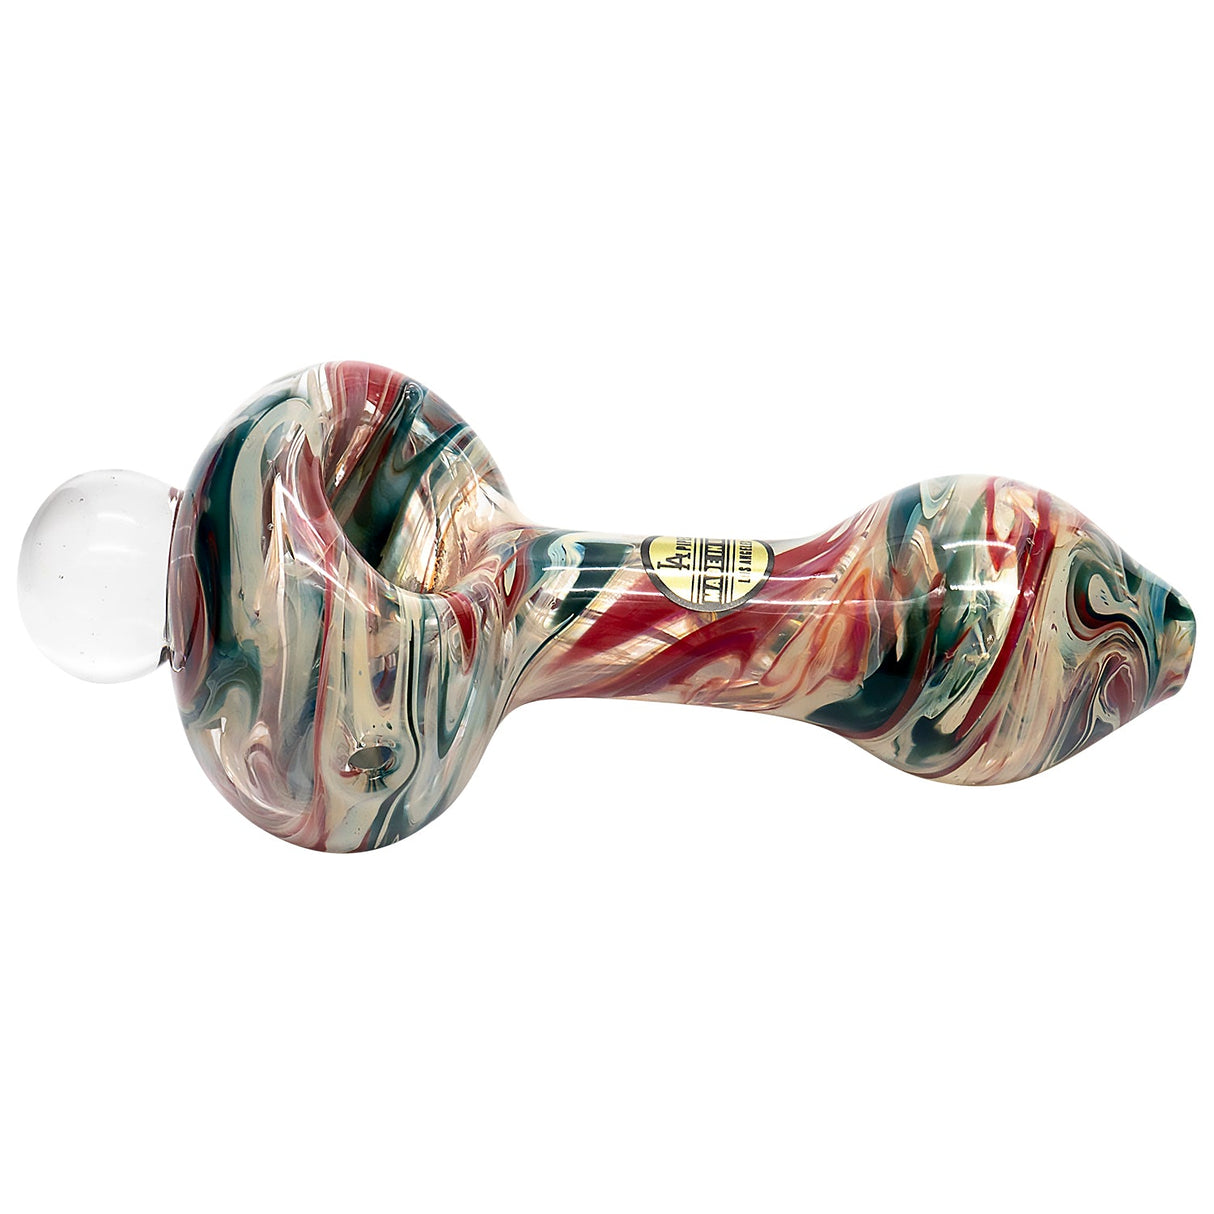 LA Pipes "Primordial Ooze" Glass Spoon Pipe, 4.5" Fumed Color Changing, Side View